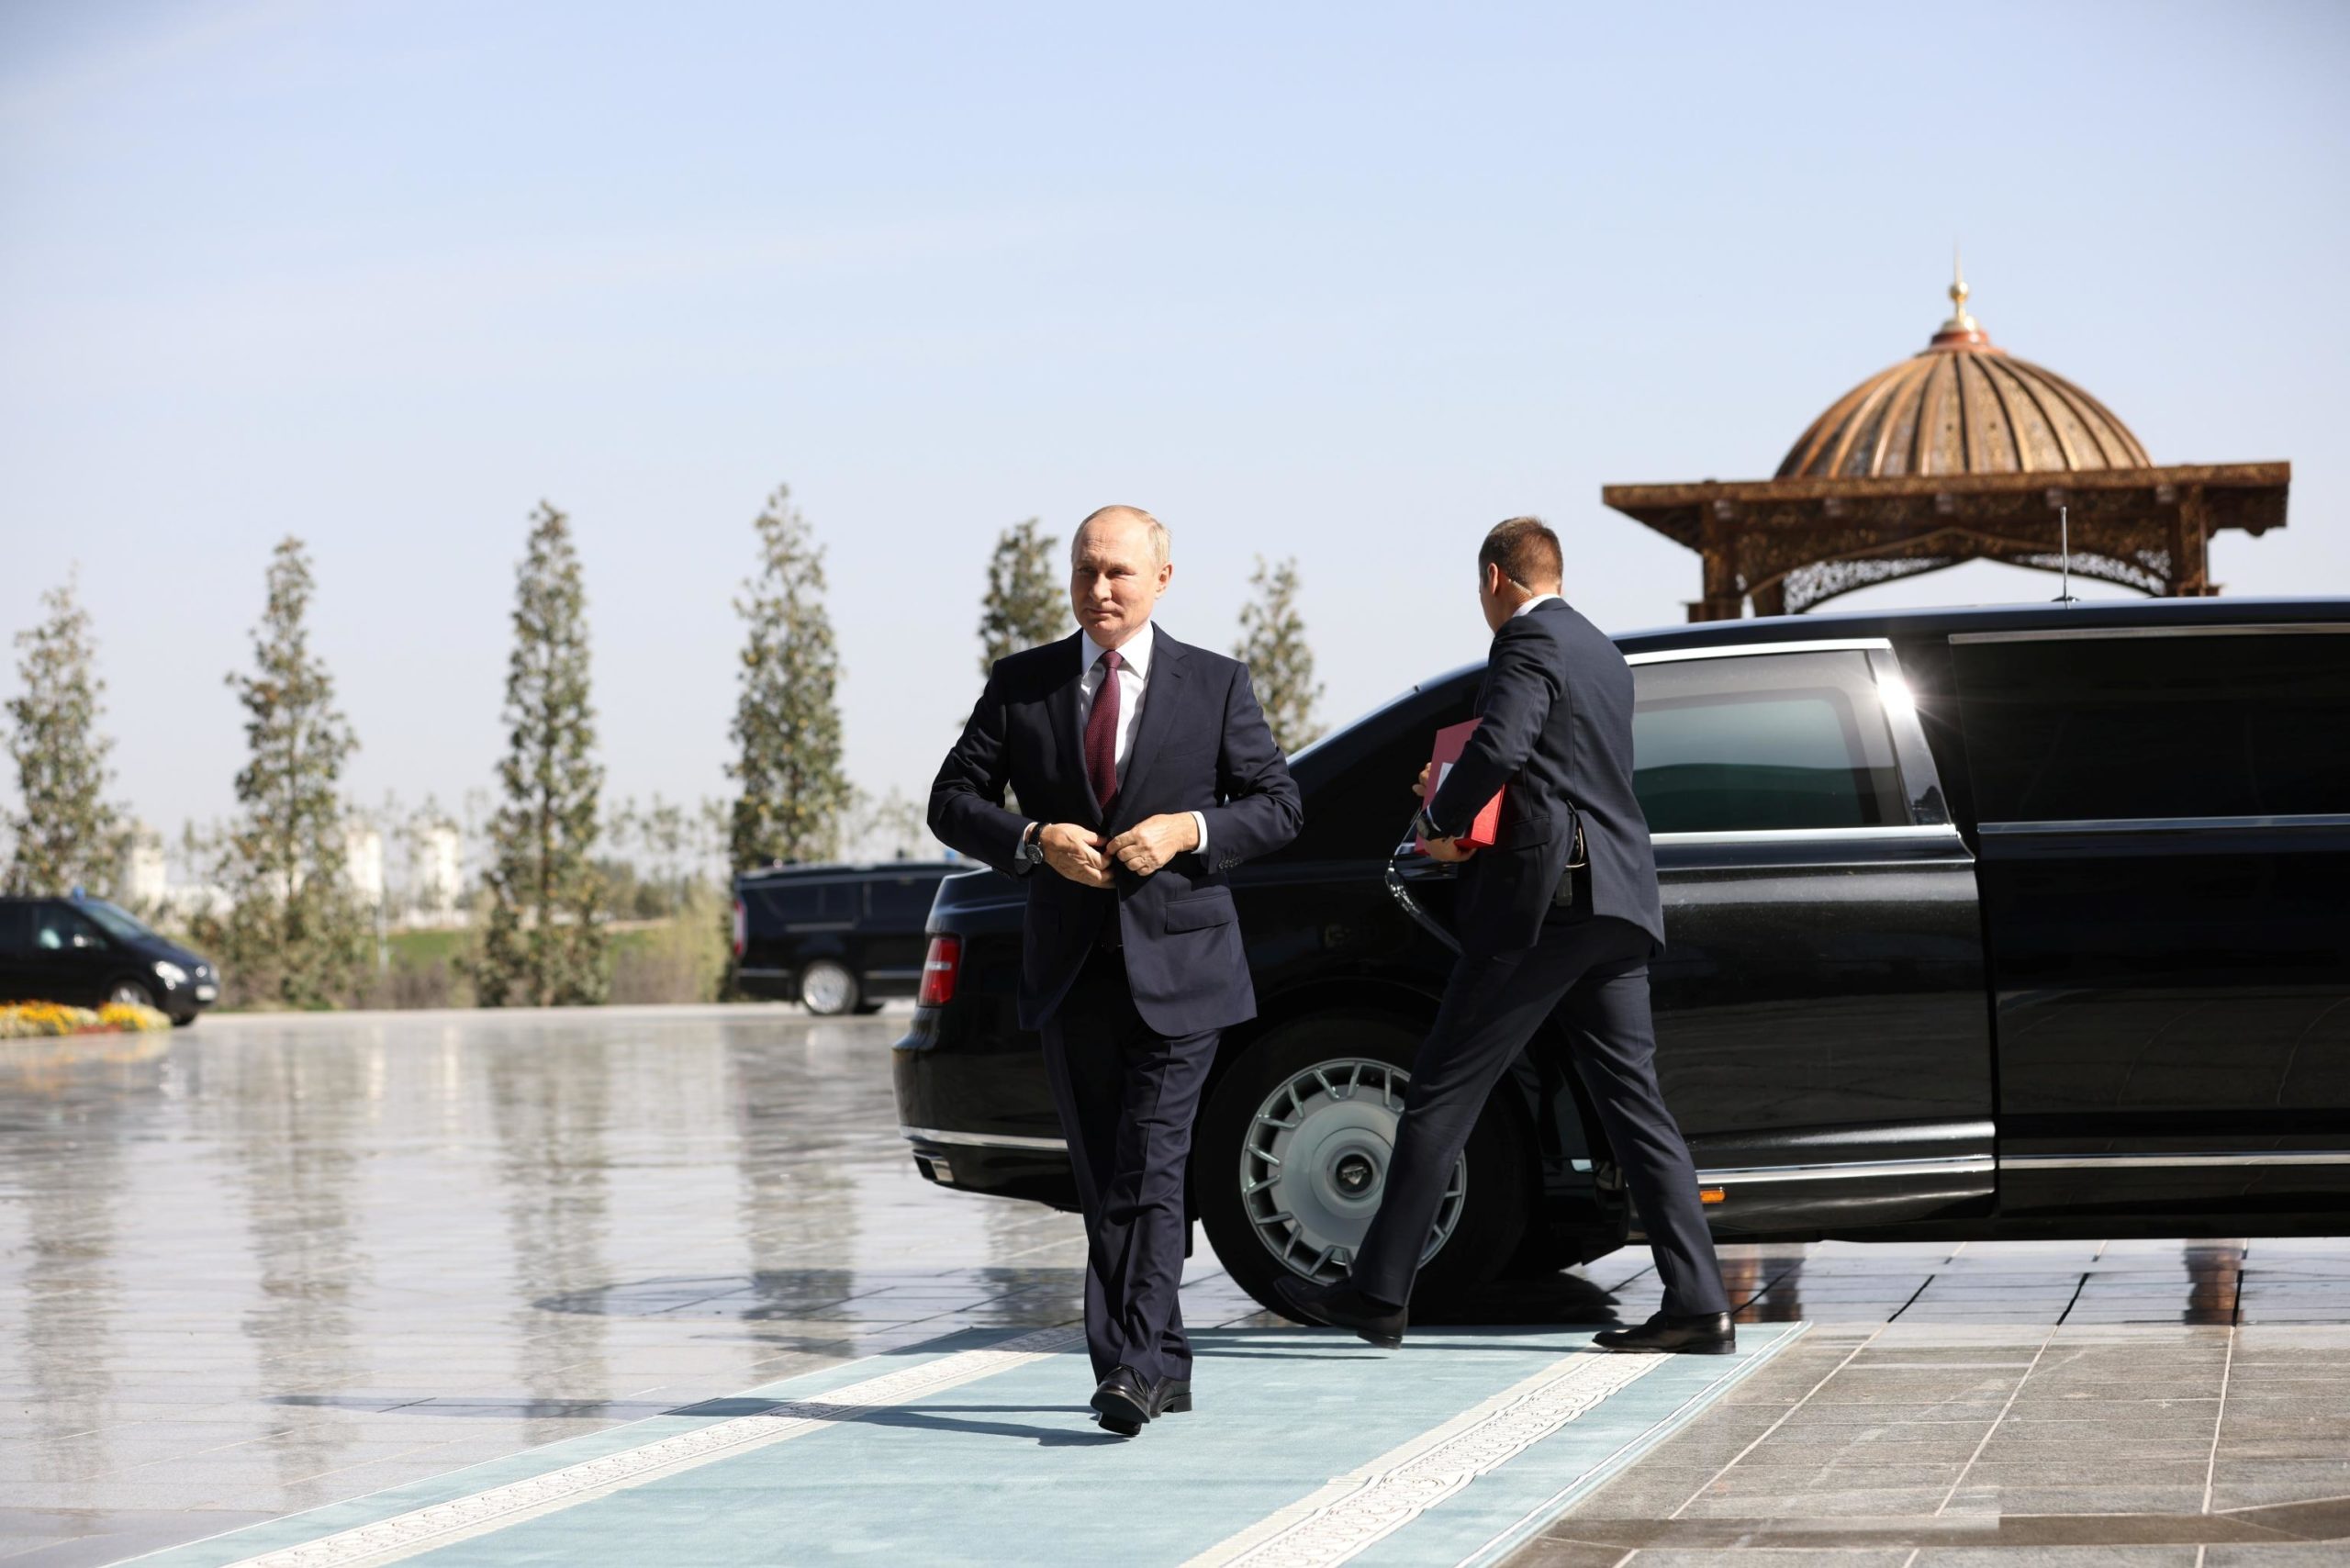 epa10187406 Russian President Vladimir Putin arrives for the 22nd Shanghai Cooperation Organisation Heads of State Council (SCO-HSC) Summit, in Samarkand, Uzbekistan, 16 September 2022. The SCO is an international alliance founded in 2001 in Shanghai and composed of China, India, Kazakhstan, Kyrgyzstan, Russia, Pakistan, Tajikistan, Uzbekistan and four Observer States interested in acceding to full membership - Afghanistan, Belarus, Iran, and Mongolia.  EPA/SERGEI BOBYLEV/SPUTNIK/KREMLIN POOL MANDATORY CREDIT